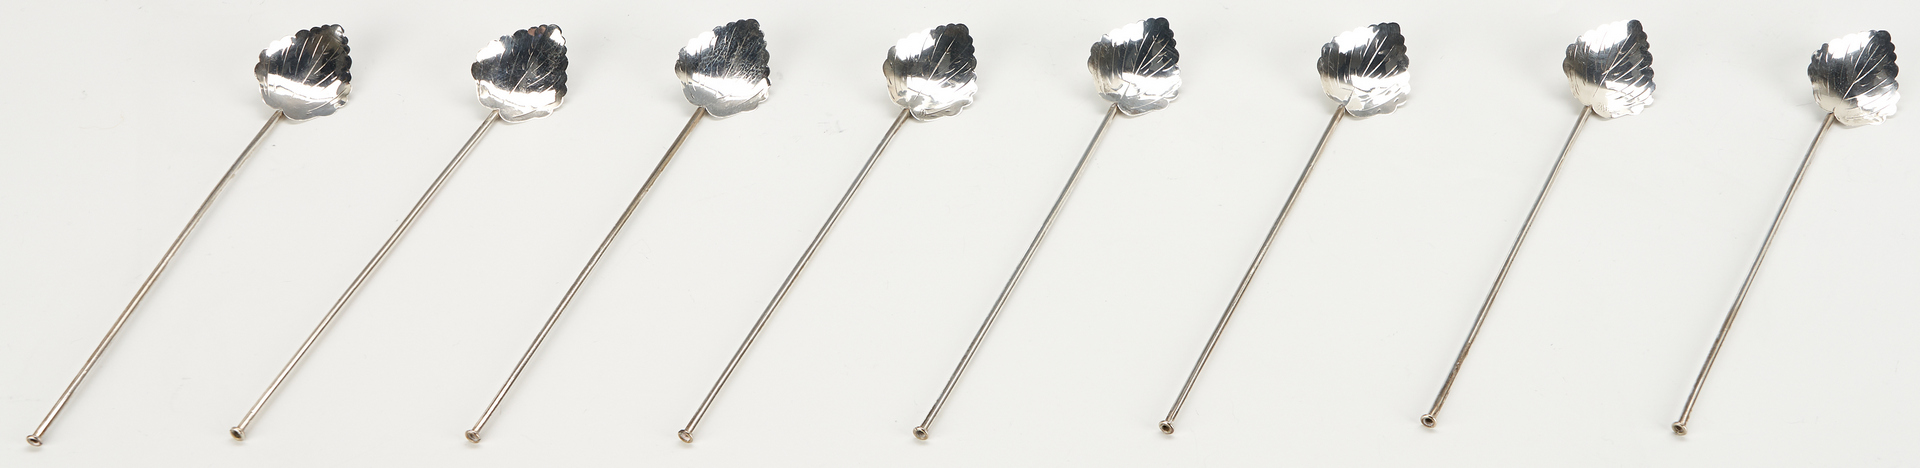 Lot 791: 9 Pcs. Mexican Sterling, Compote & Stirrers